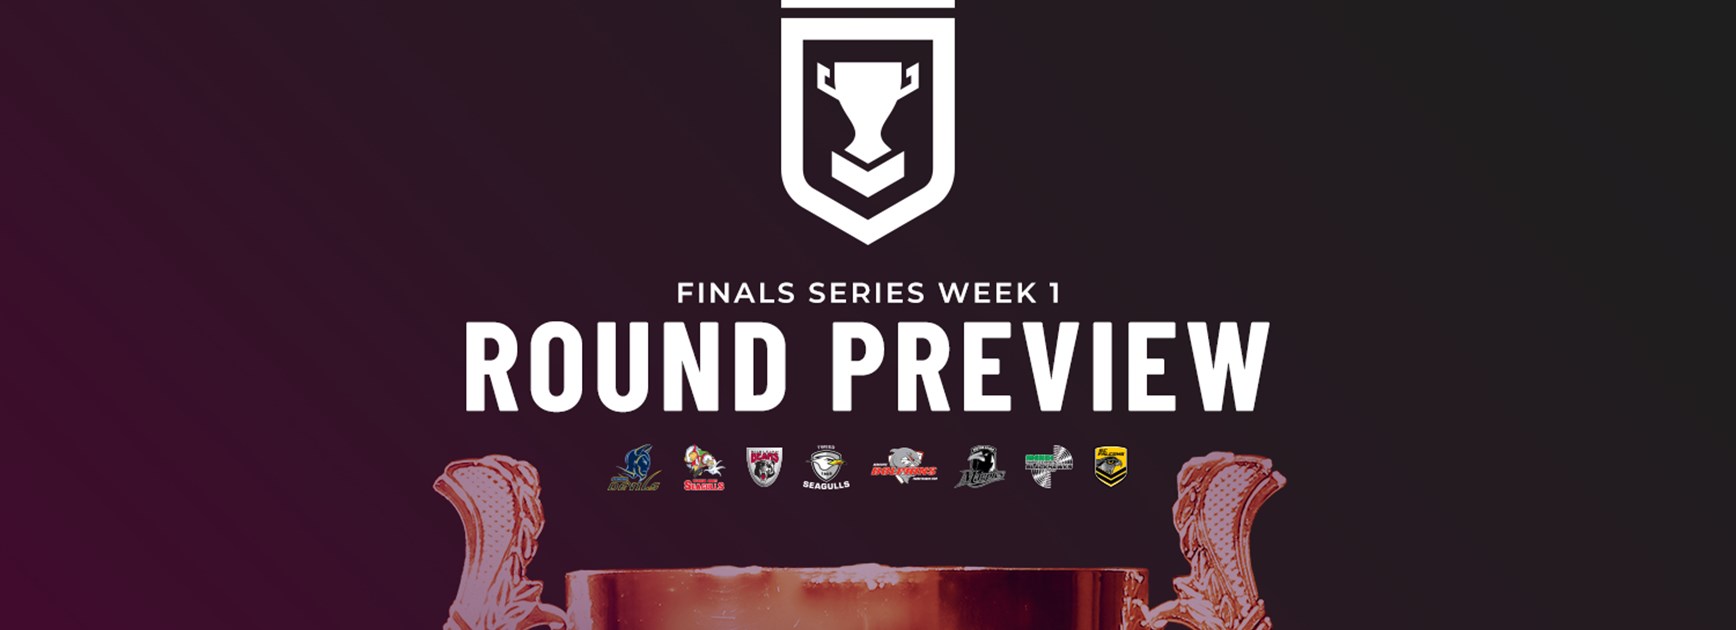 Finals Week 1 preview: Four big games to kick off finals series